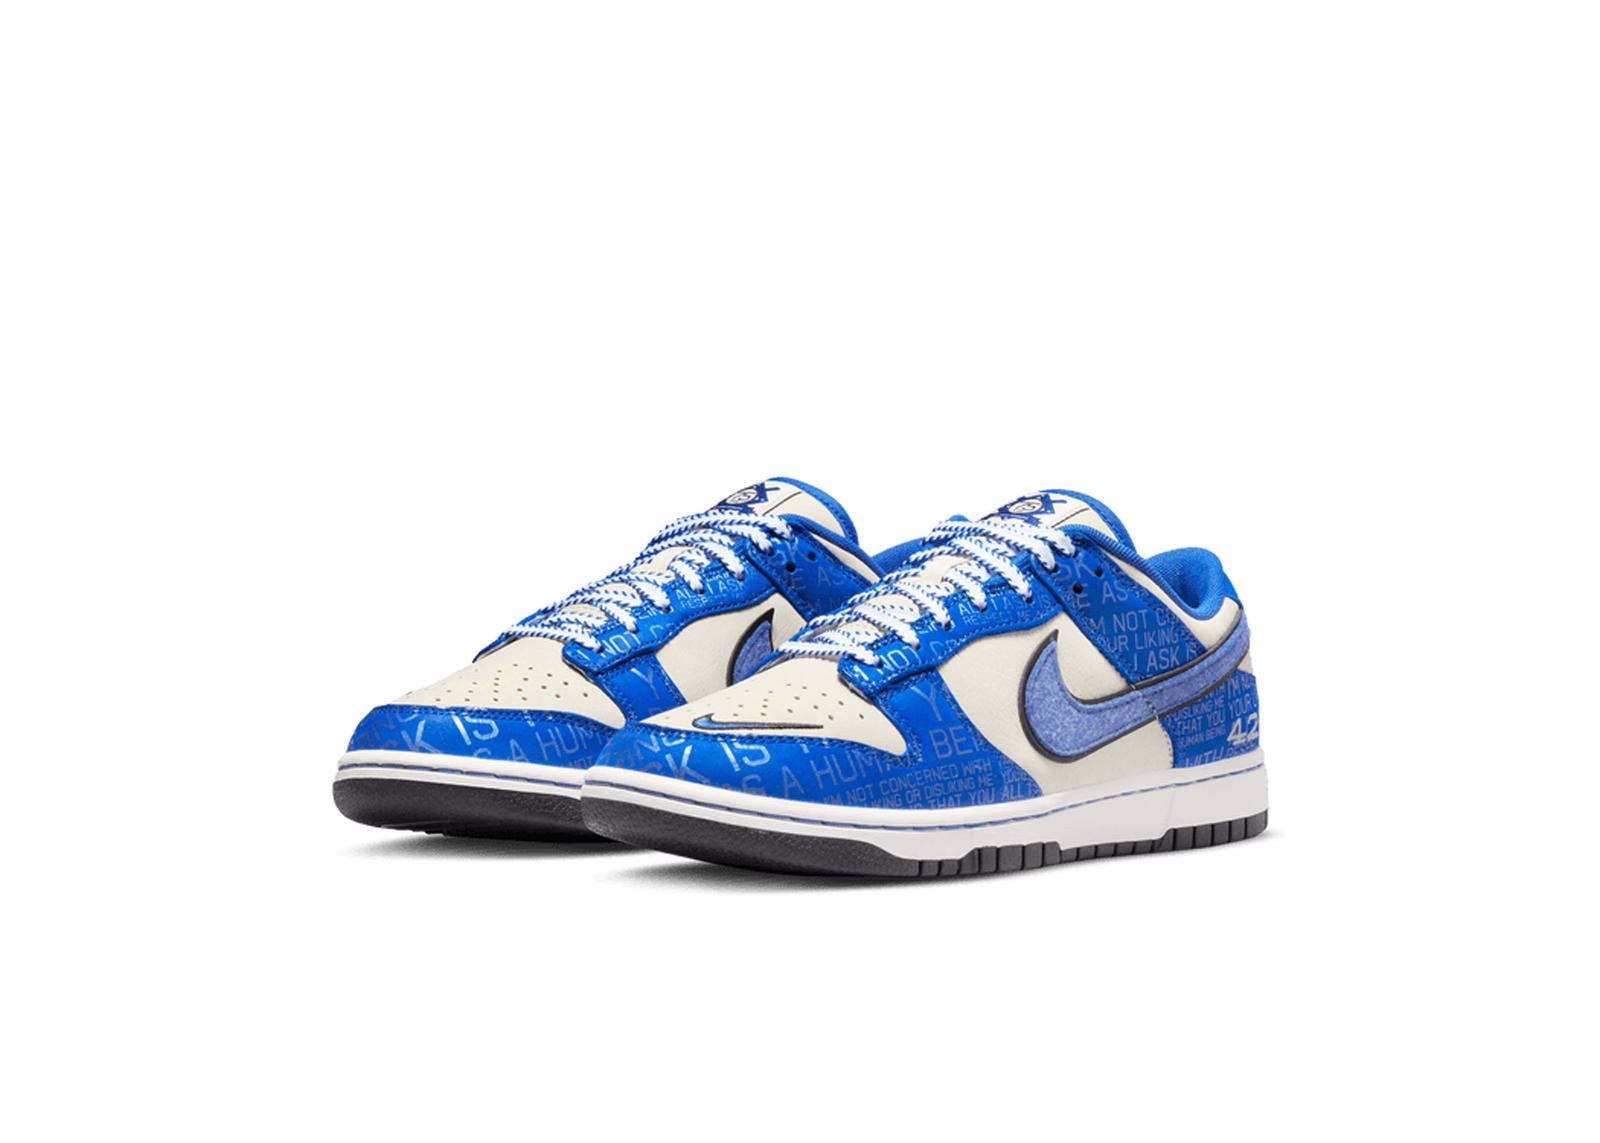 Nike Dunk Low Jackie Robinson Come & Go On SNKRS App